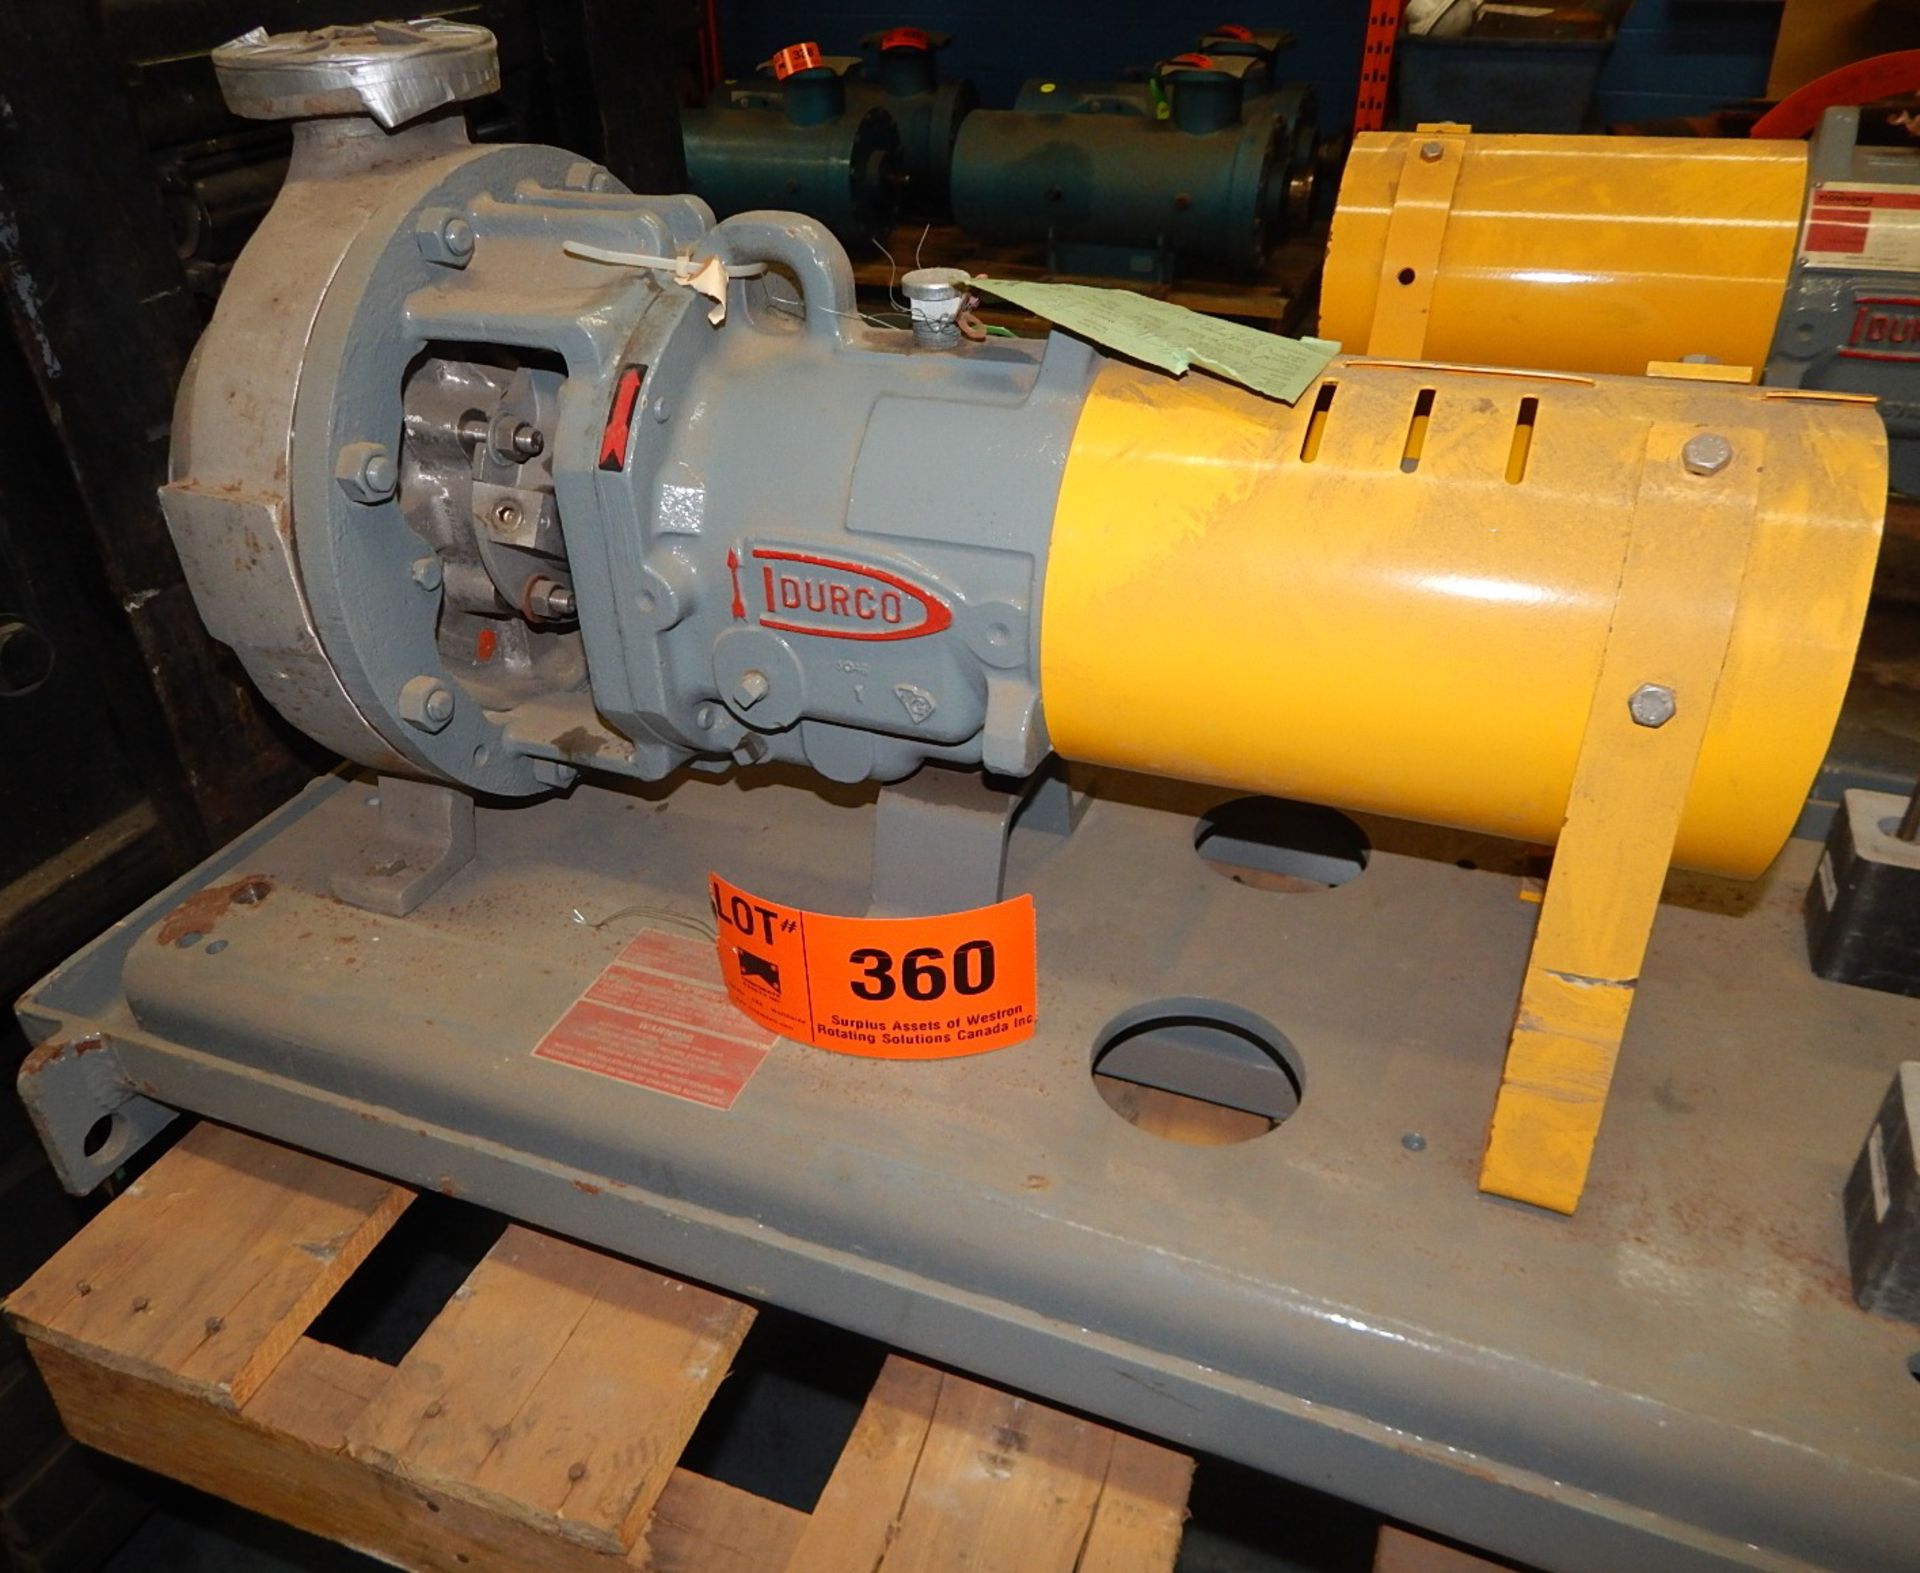 FLOWSERVE 2K3X1.5-10ARV CENTRIFUGAL PUMP WITH 1700 RPM, 70 USGMP, S/N: B030232-16 (CI) [RIGGING